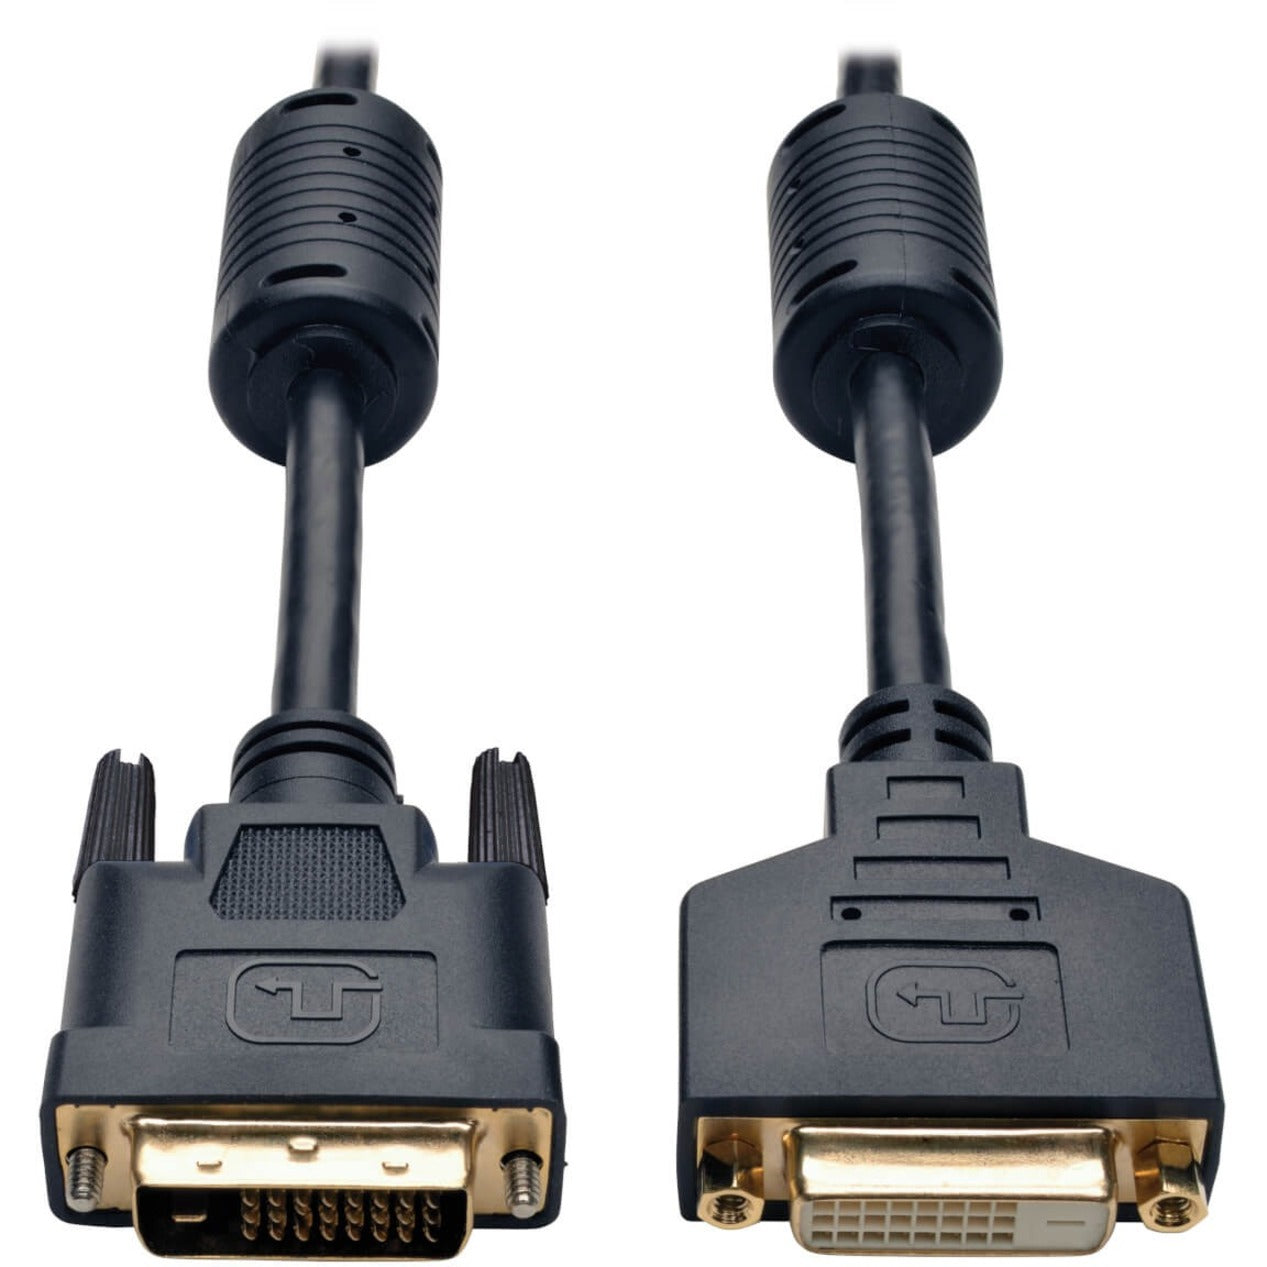 Tripp Lite P562-006 DVI Dual Link Extension Cable, 6 ft, High Resolution Video Transmission